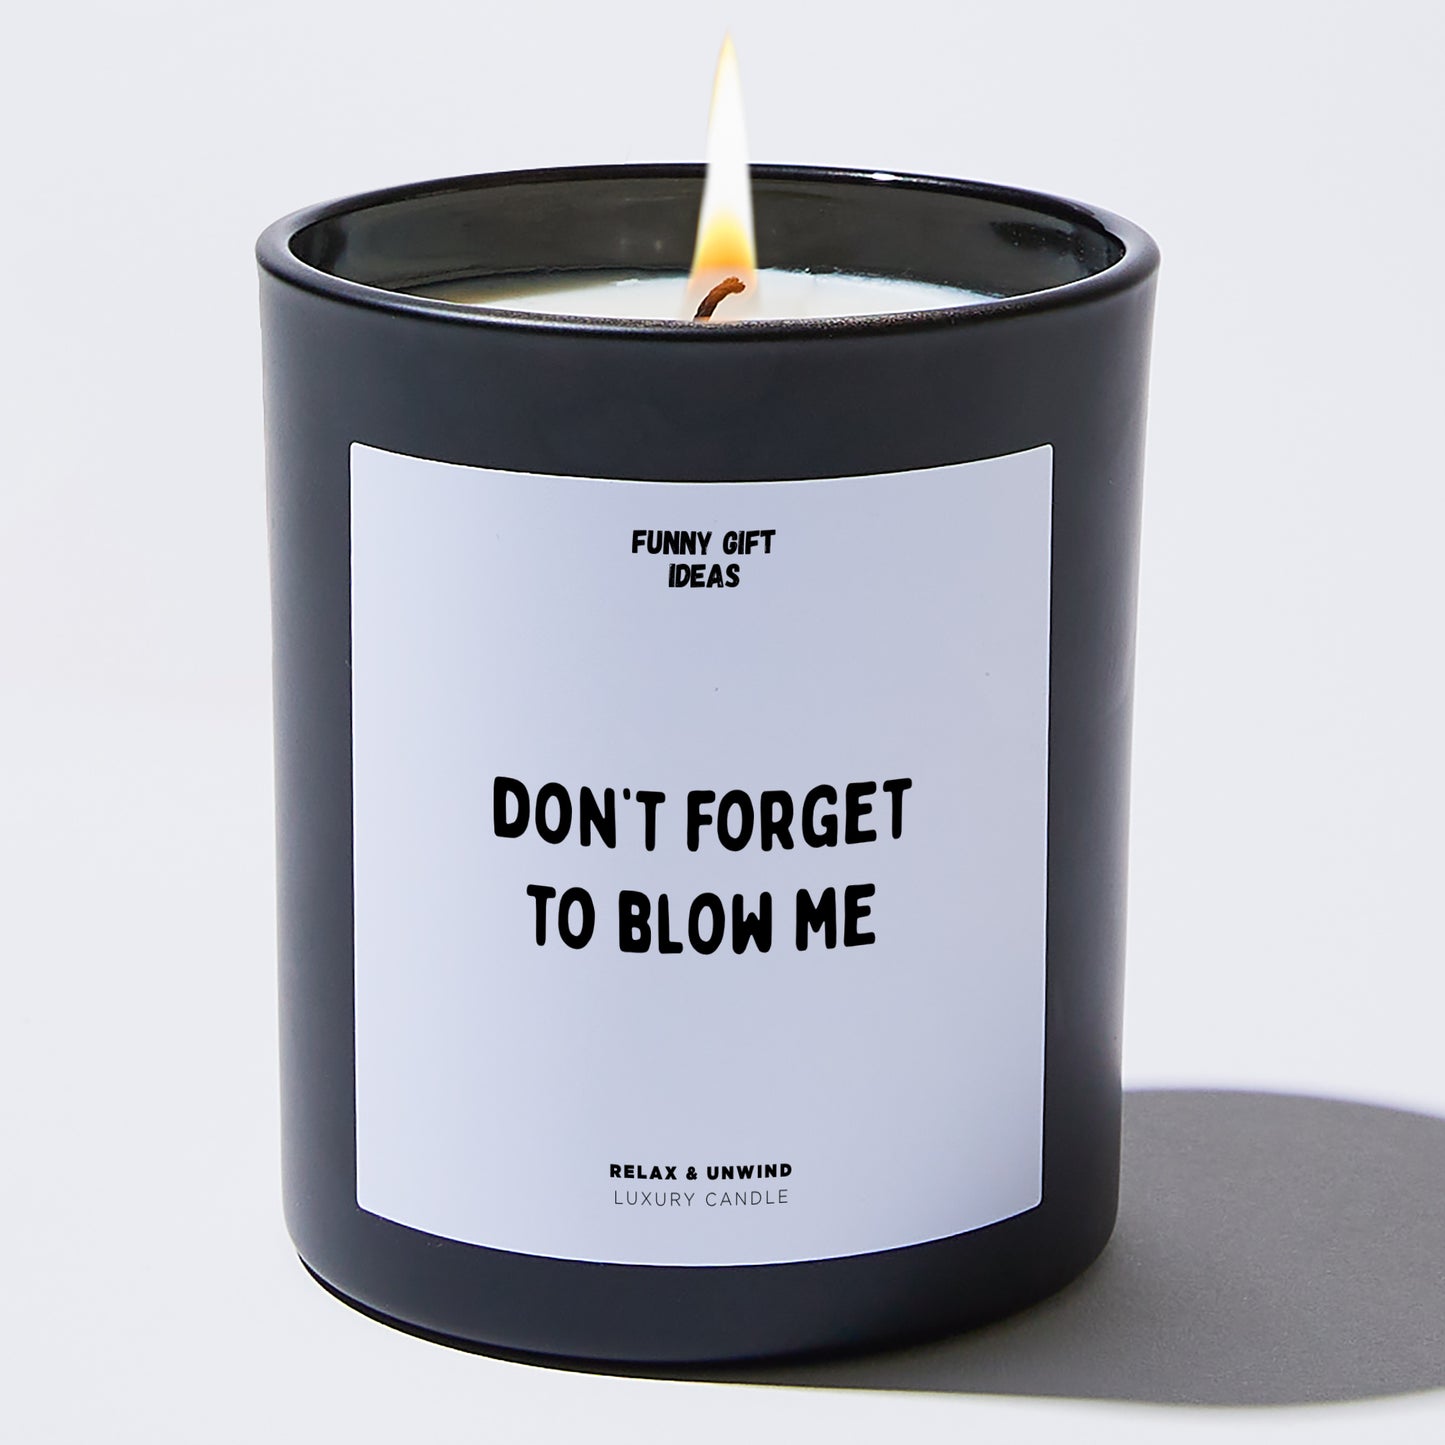 Funny Candles Donâ€™t Forget To Blow Me - Funny Gift Ideas